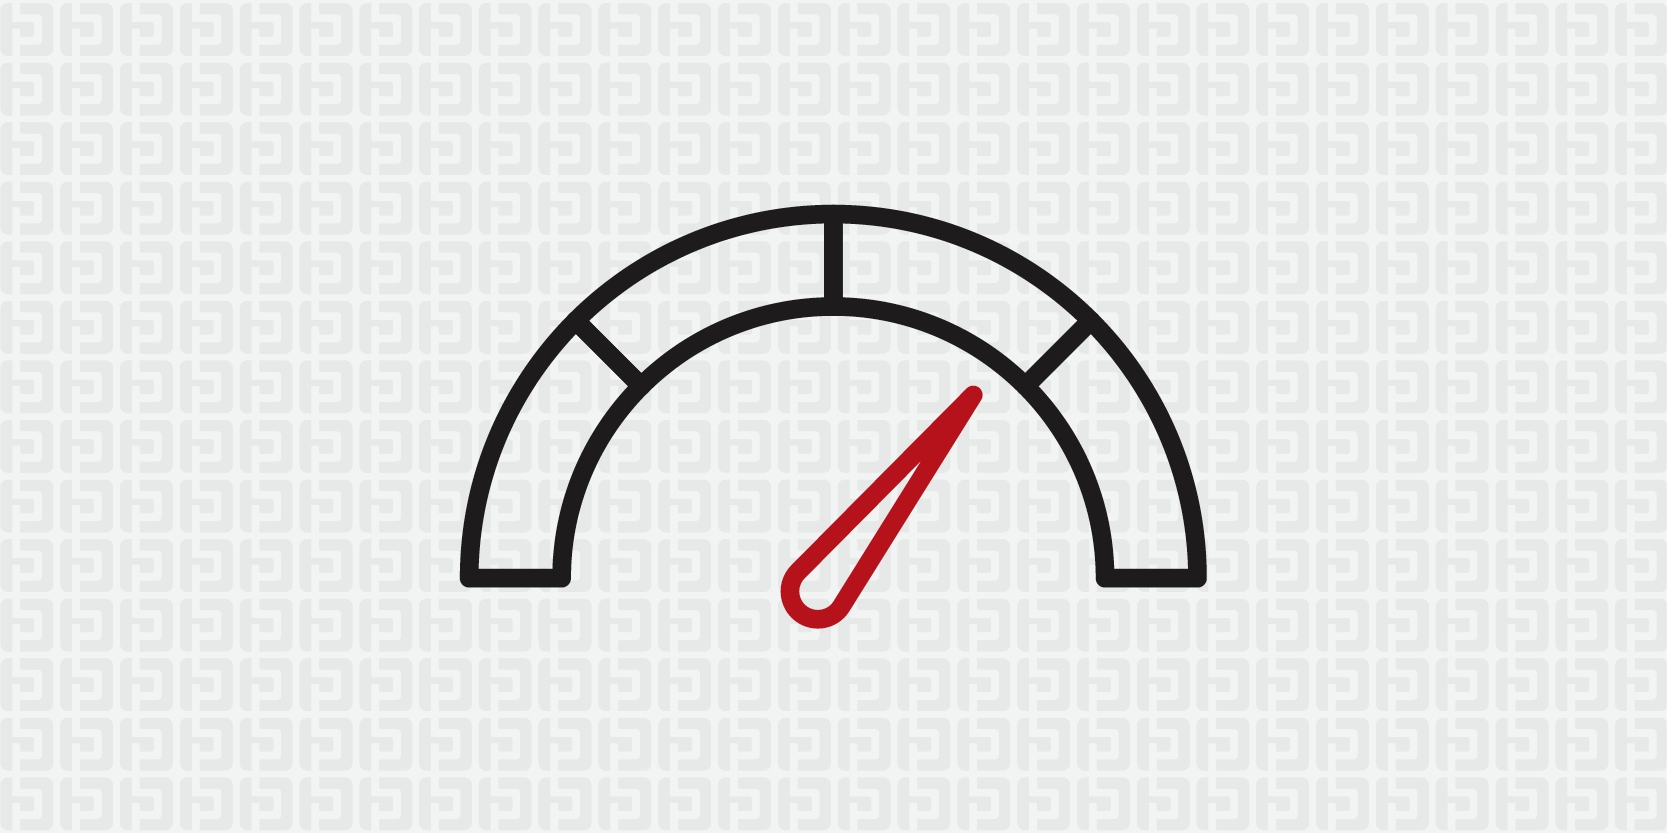 speedometer icon with arrow pointed 3/4 of the way to the right to indicate good credit score